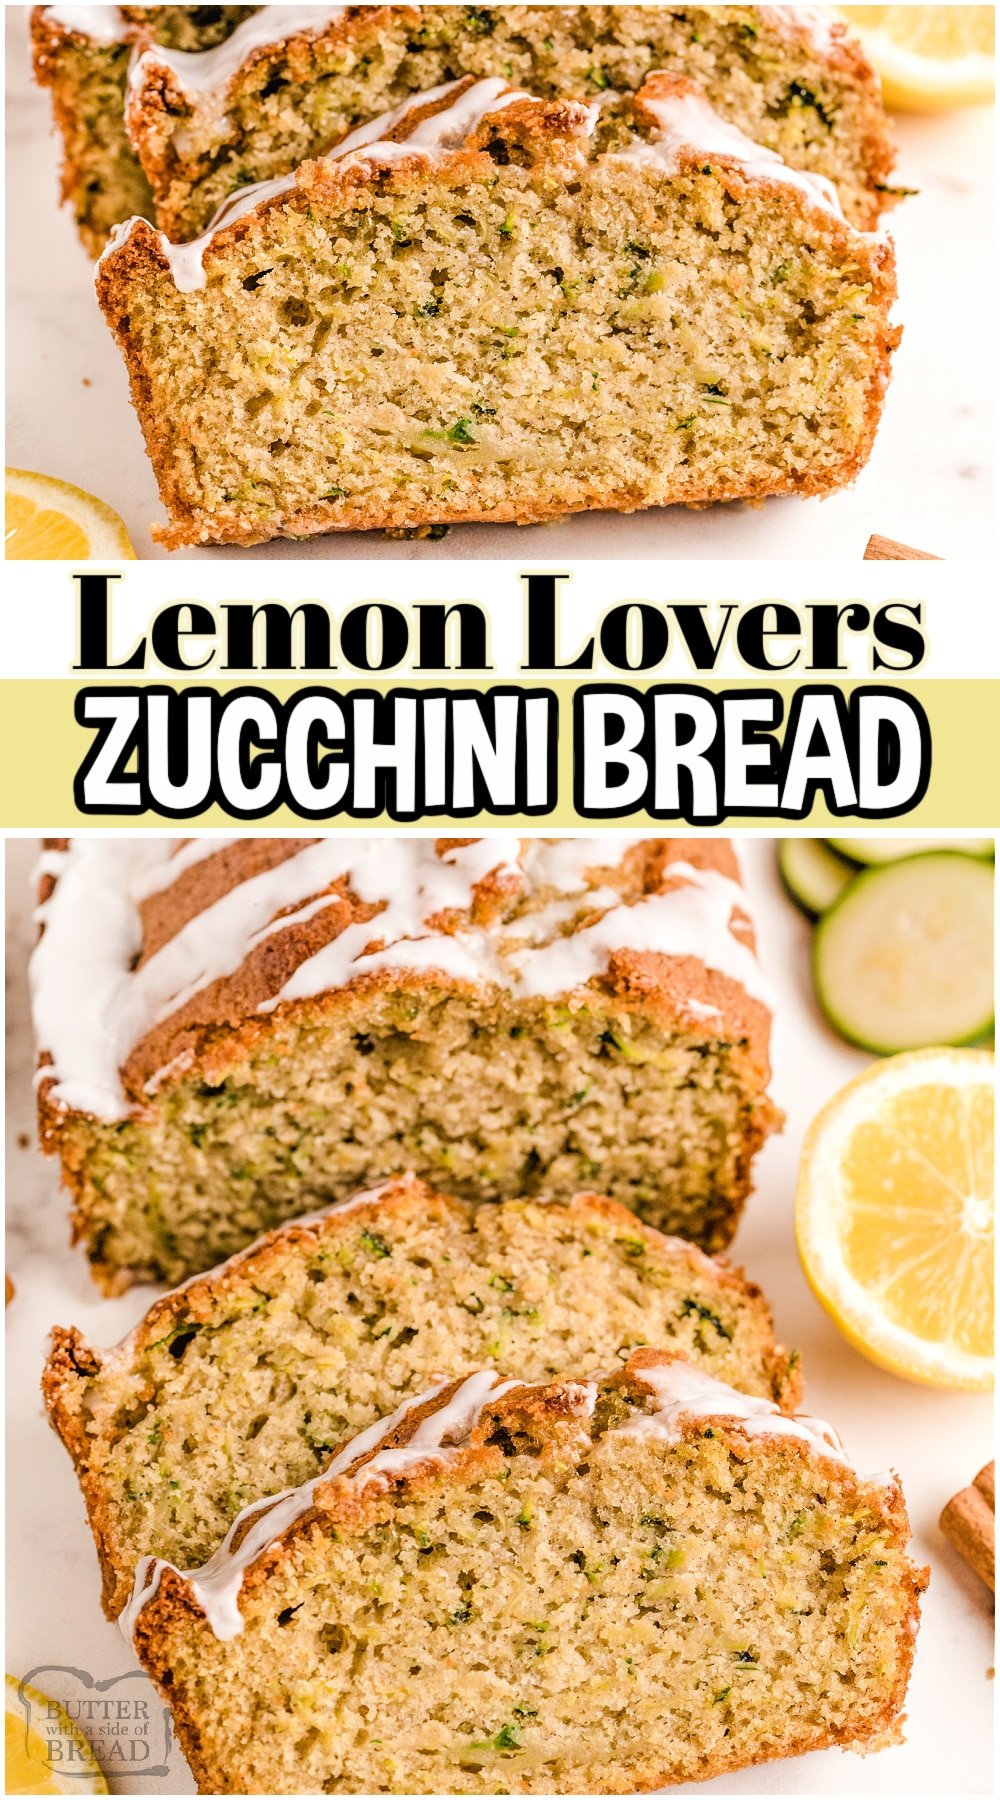 Iced Lemon Zucchini Bread recipe made with simple ingredients and has fantastic flavor! Light & soft sweet bread that uses garden zucchini and the bright, fresh flavor of lemon. Fun variation on classic zucchini bread!